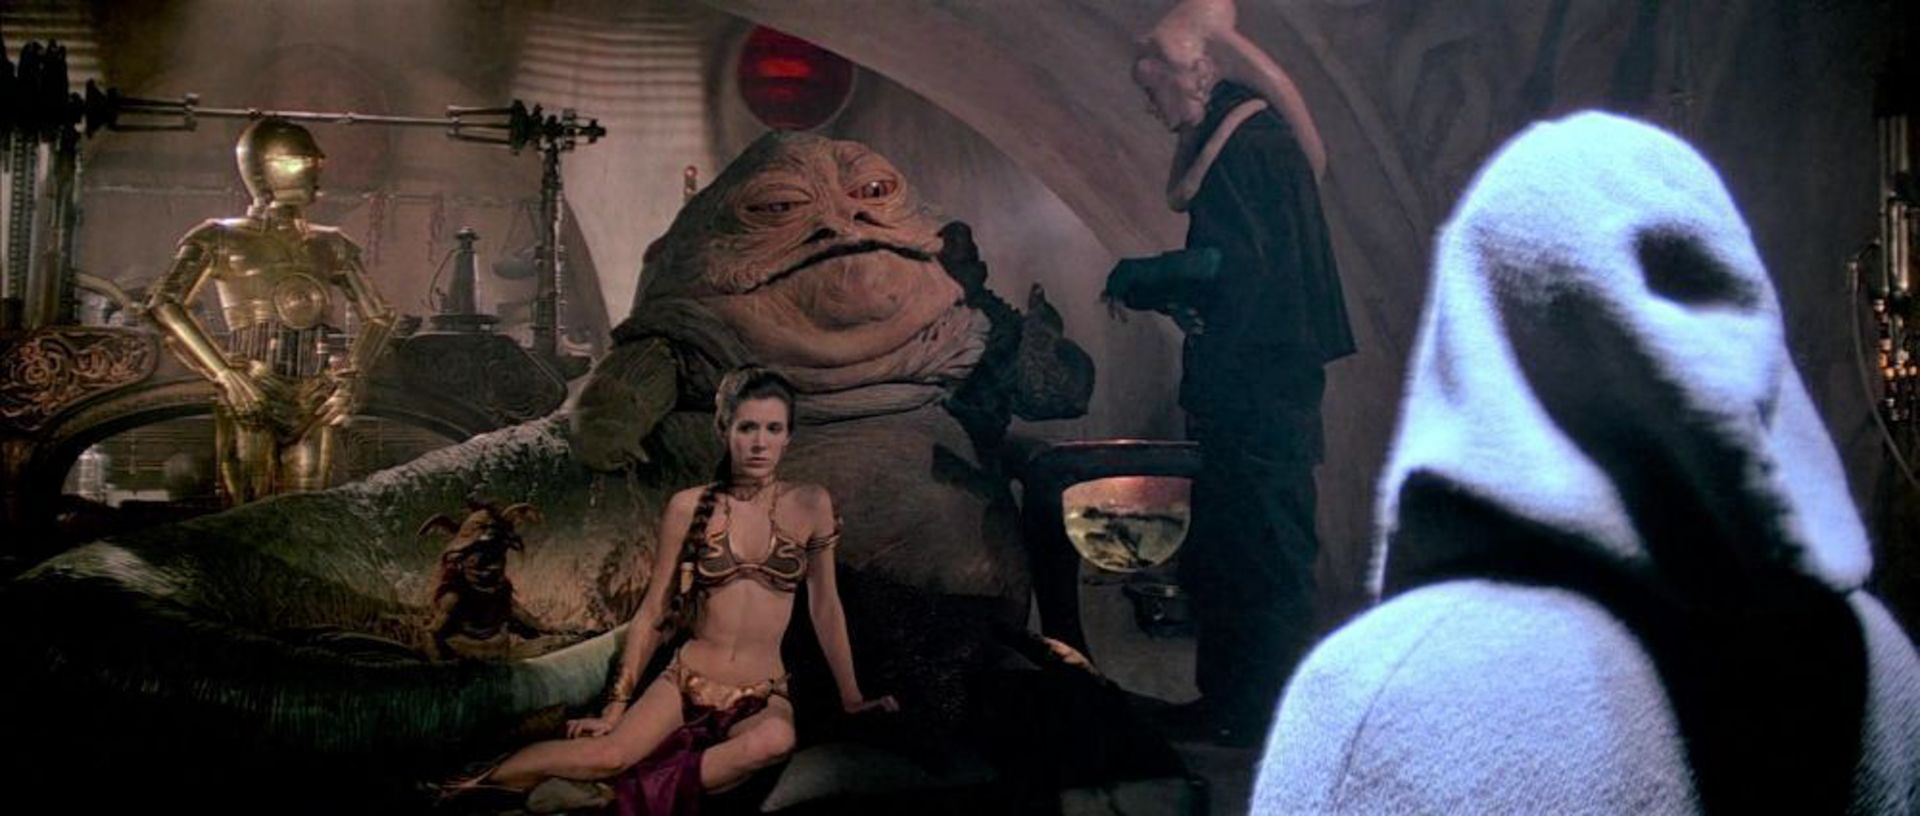 STAR WARS - RETURN OF THE JEDI | CARRIE FISHER "PRINCESS LEIA ORGANA" JABBA THE HUTT SLAVE COSTUME P - Image 49 of 54